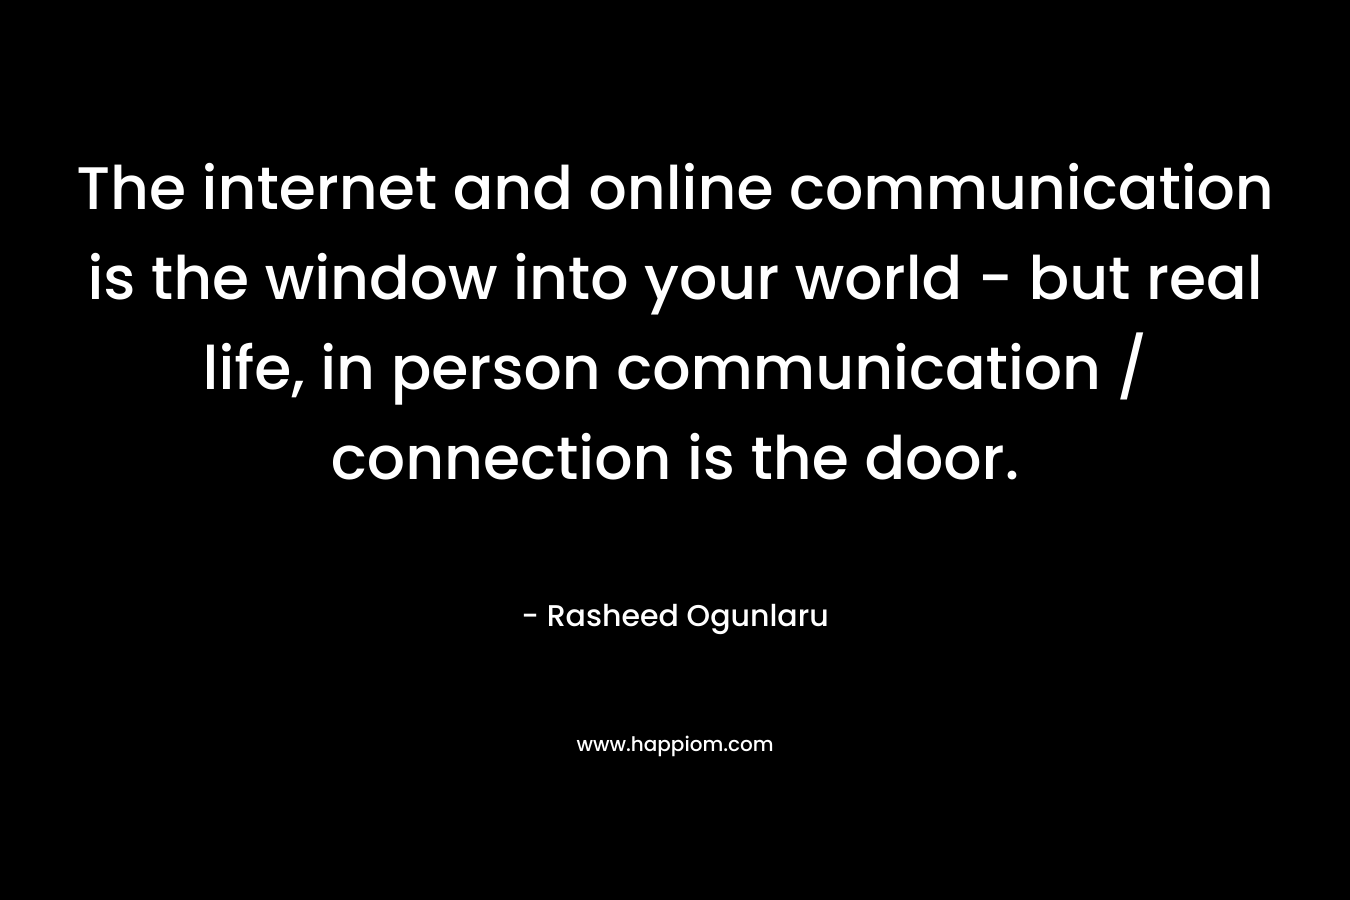 The internet and online communication is the window into your world - but real life, in person communication / connection is the door.